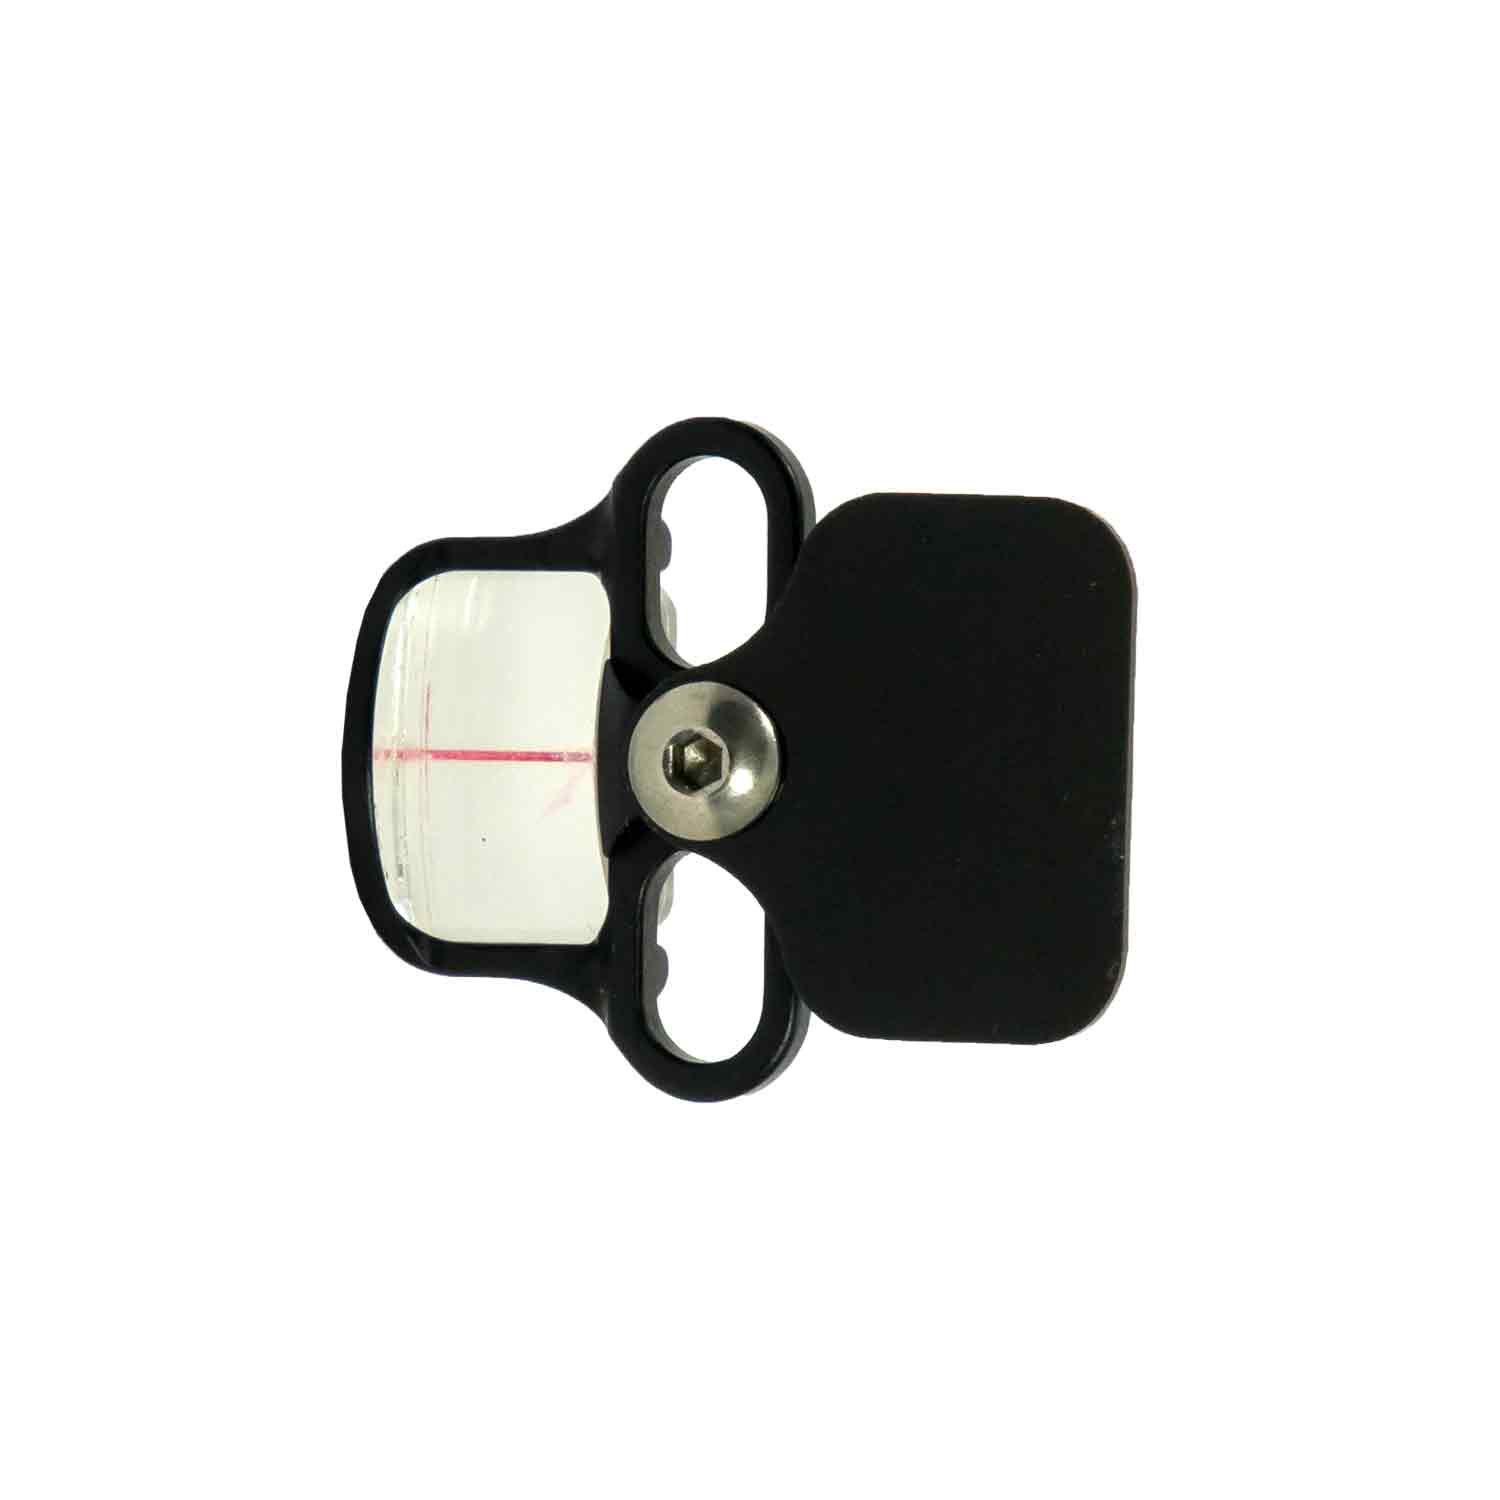 Axcel Sight Scale Magnifier Wide